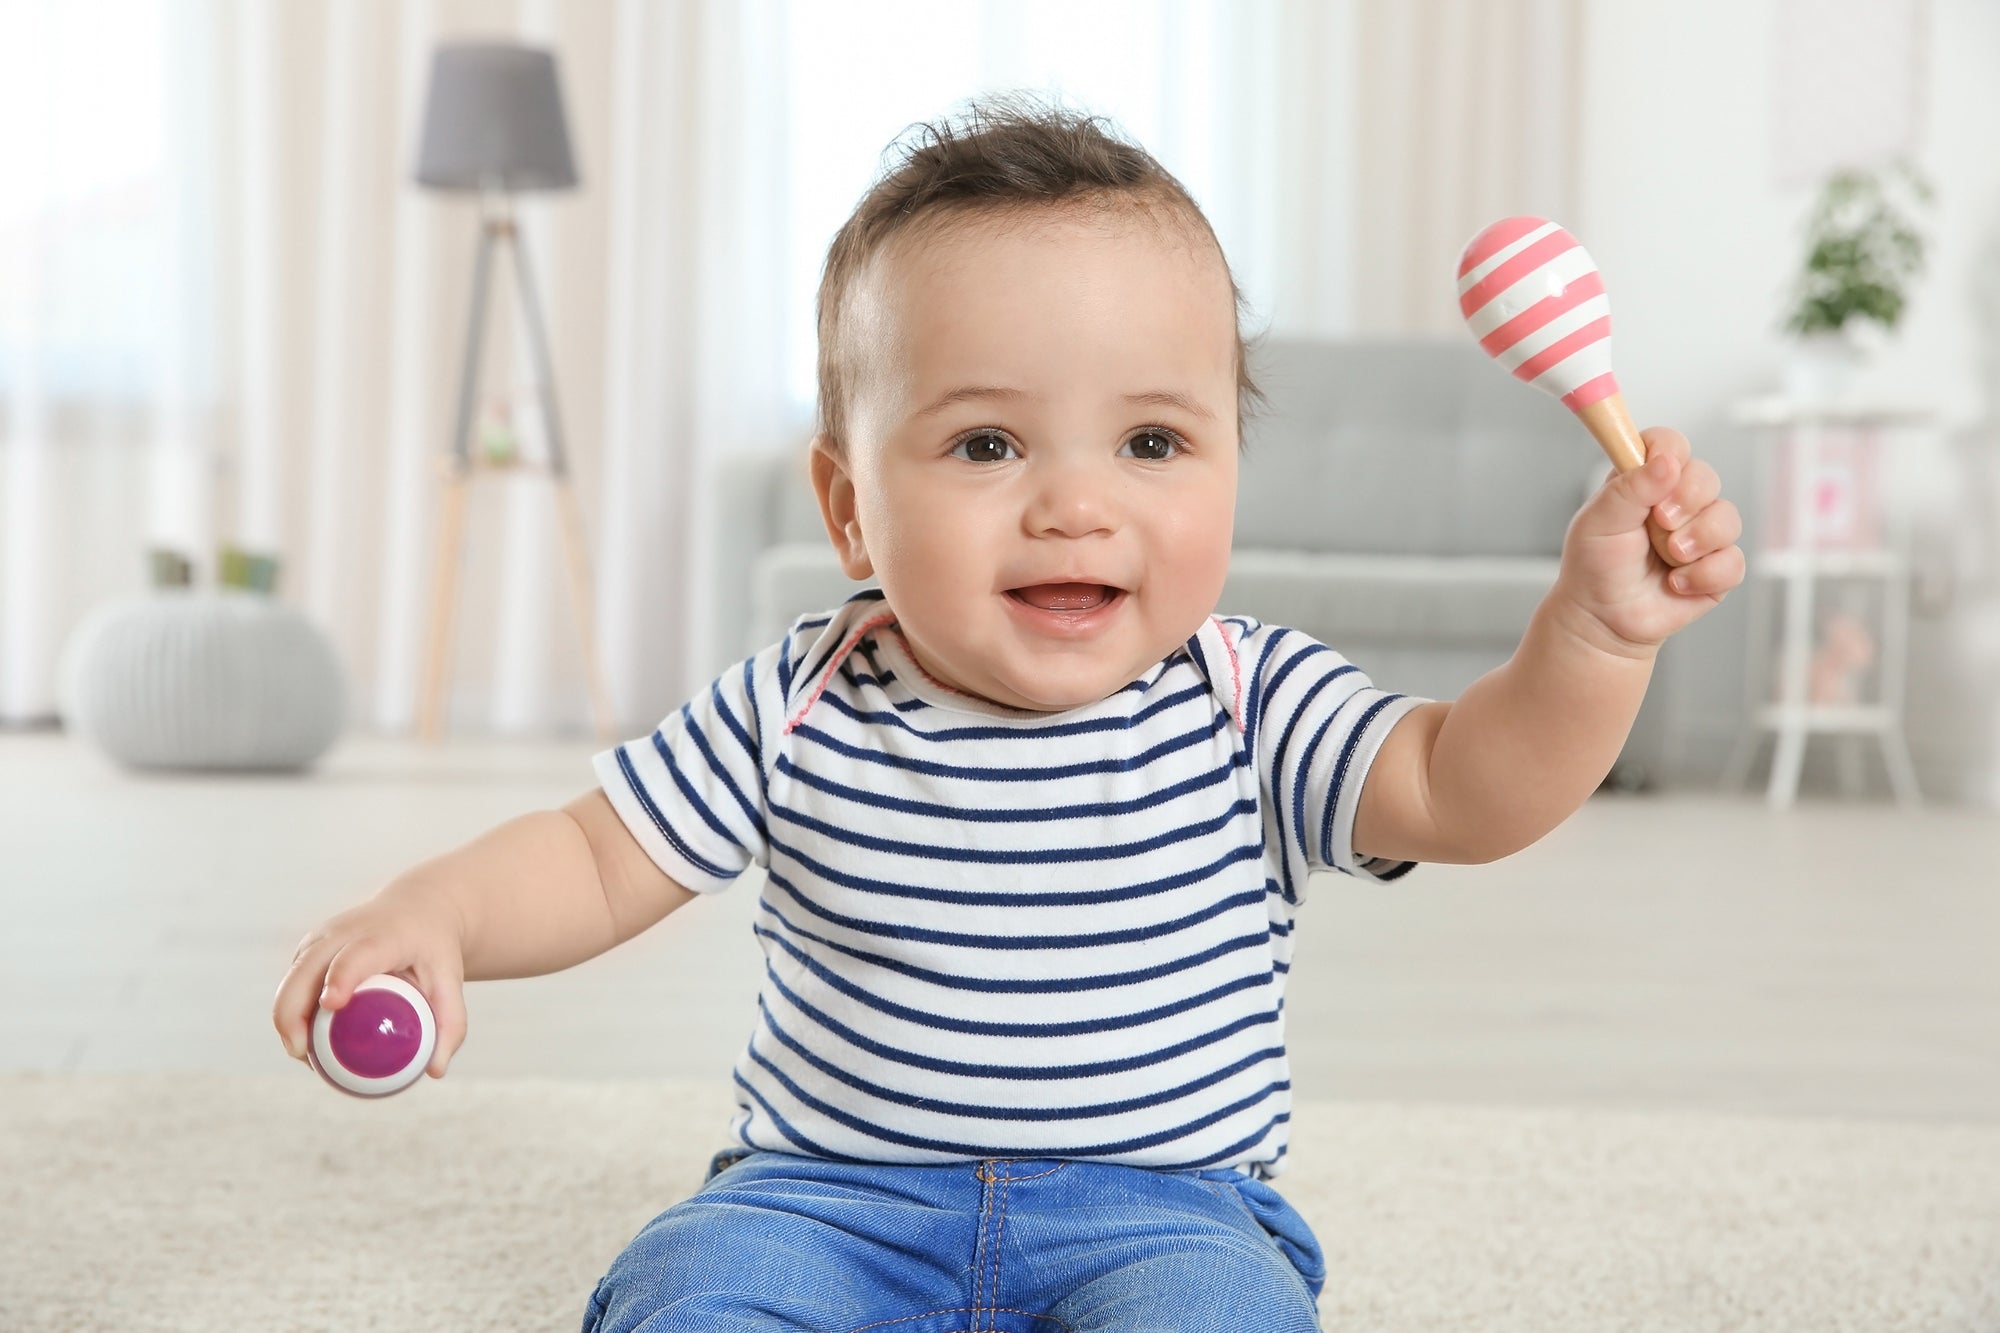 The 10 Best Indoor Games to play with Baby